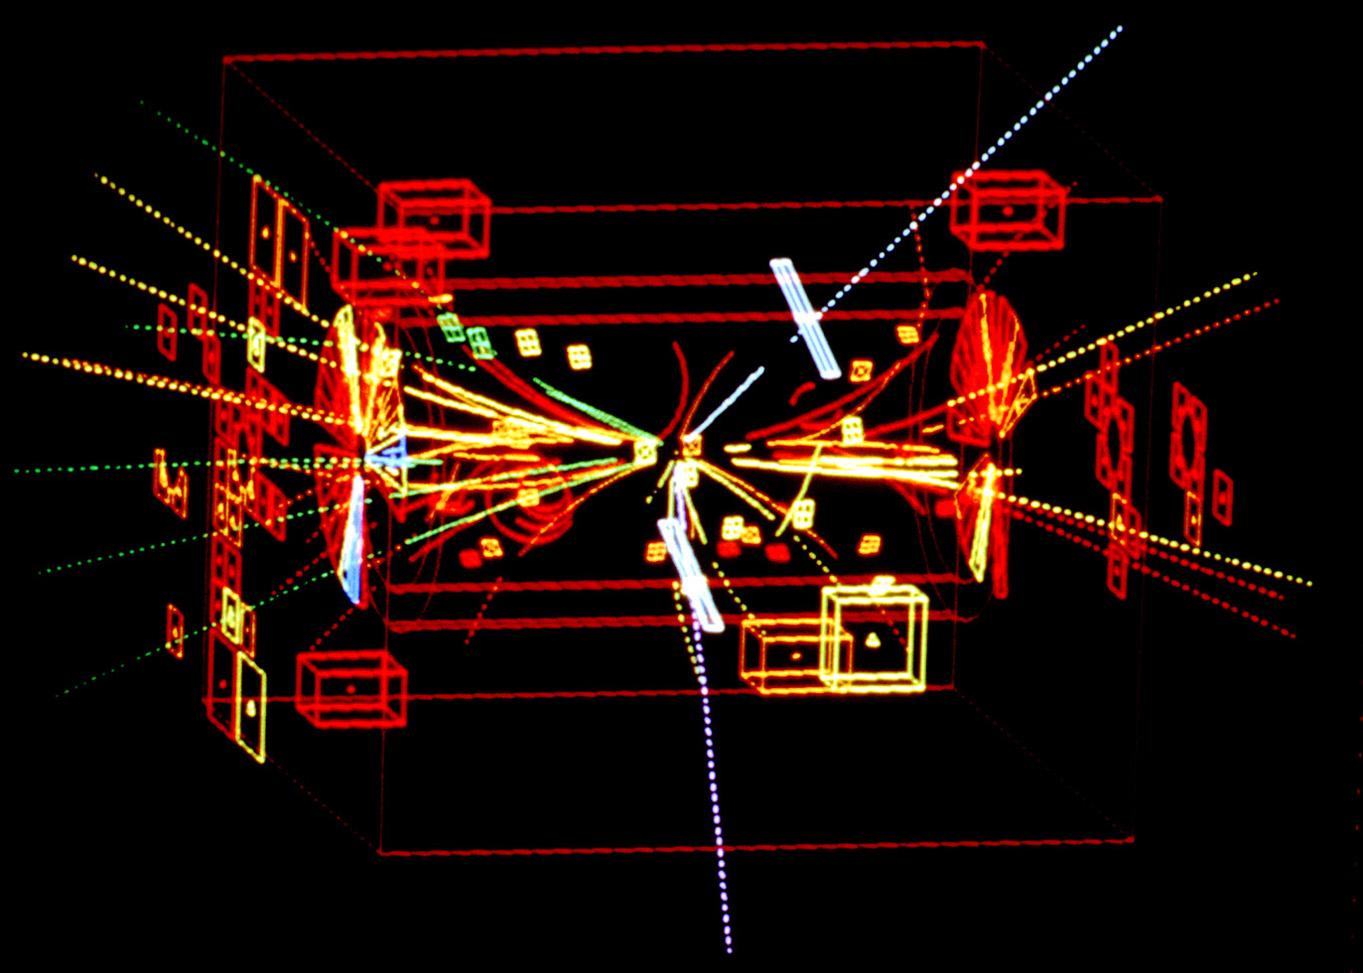 This collision recorded by the UA1 experiment on 30 April 1983 is the first detection of a Z0 particle. (Image : CERN)